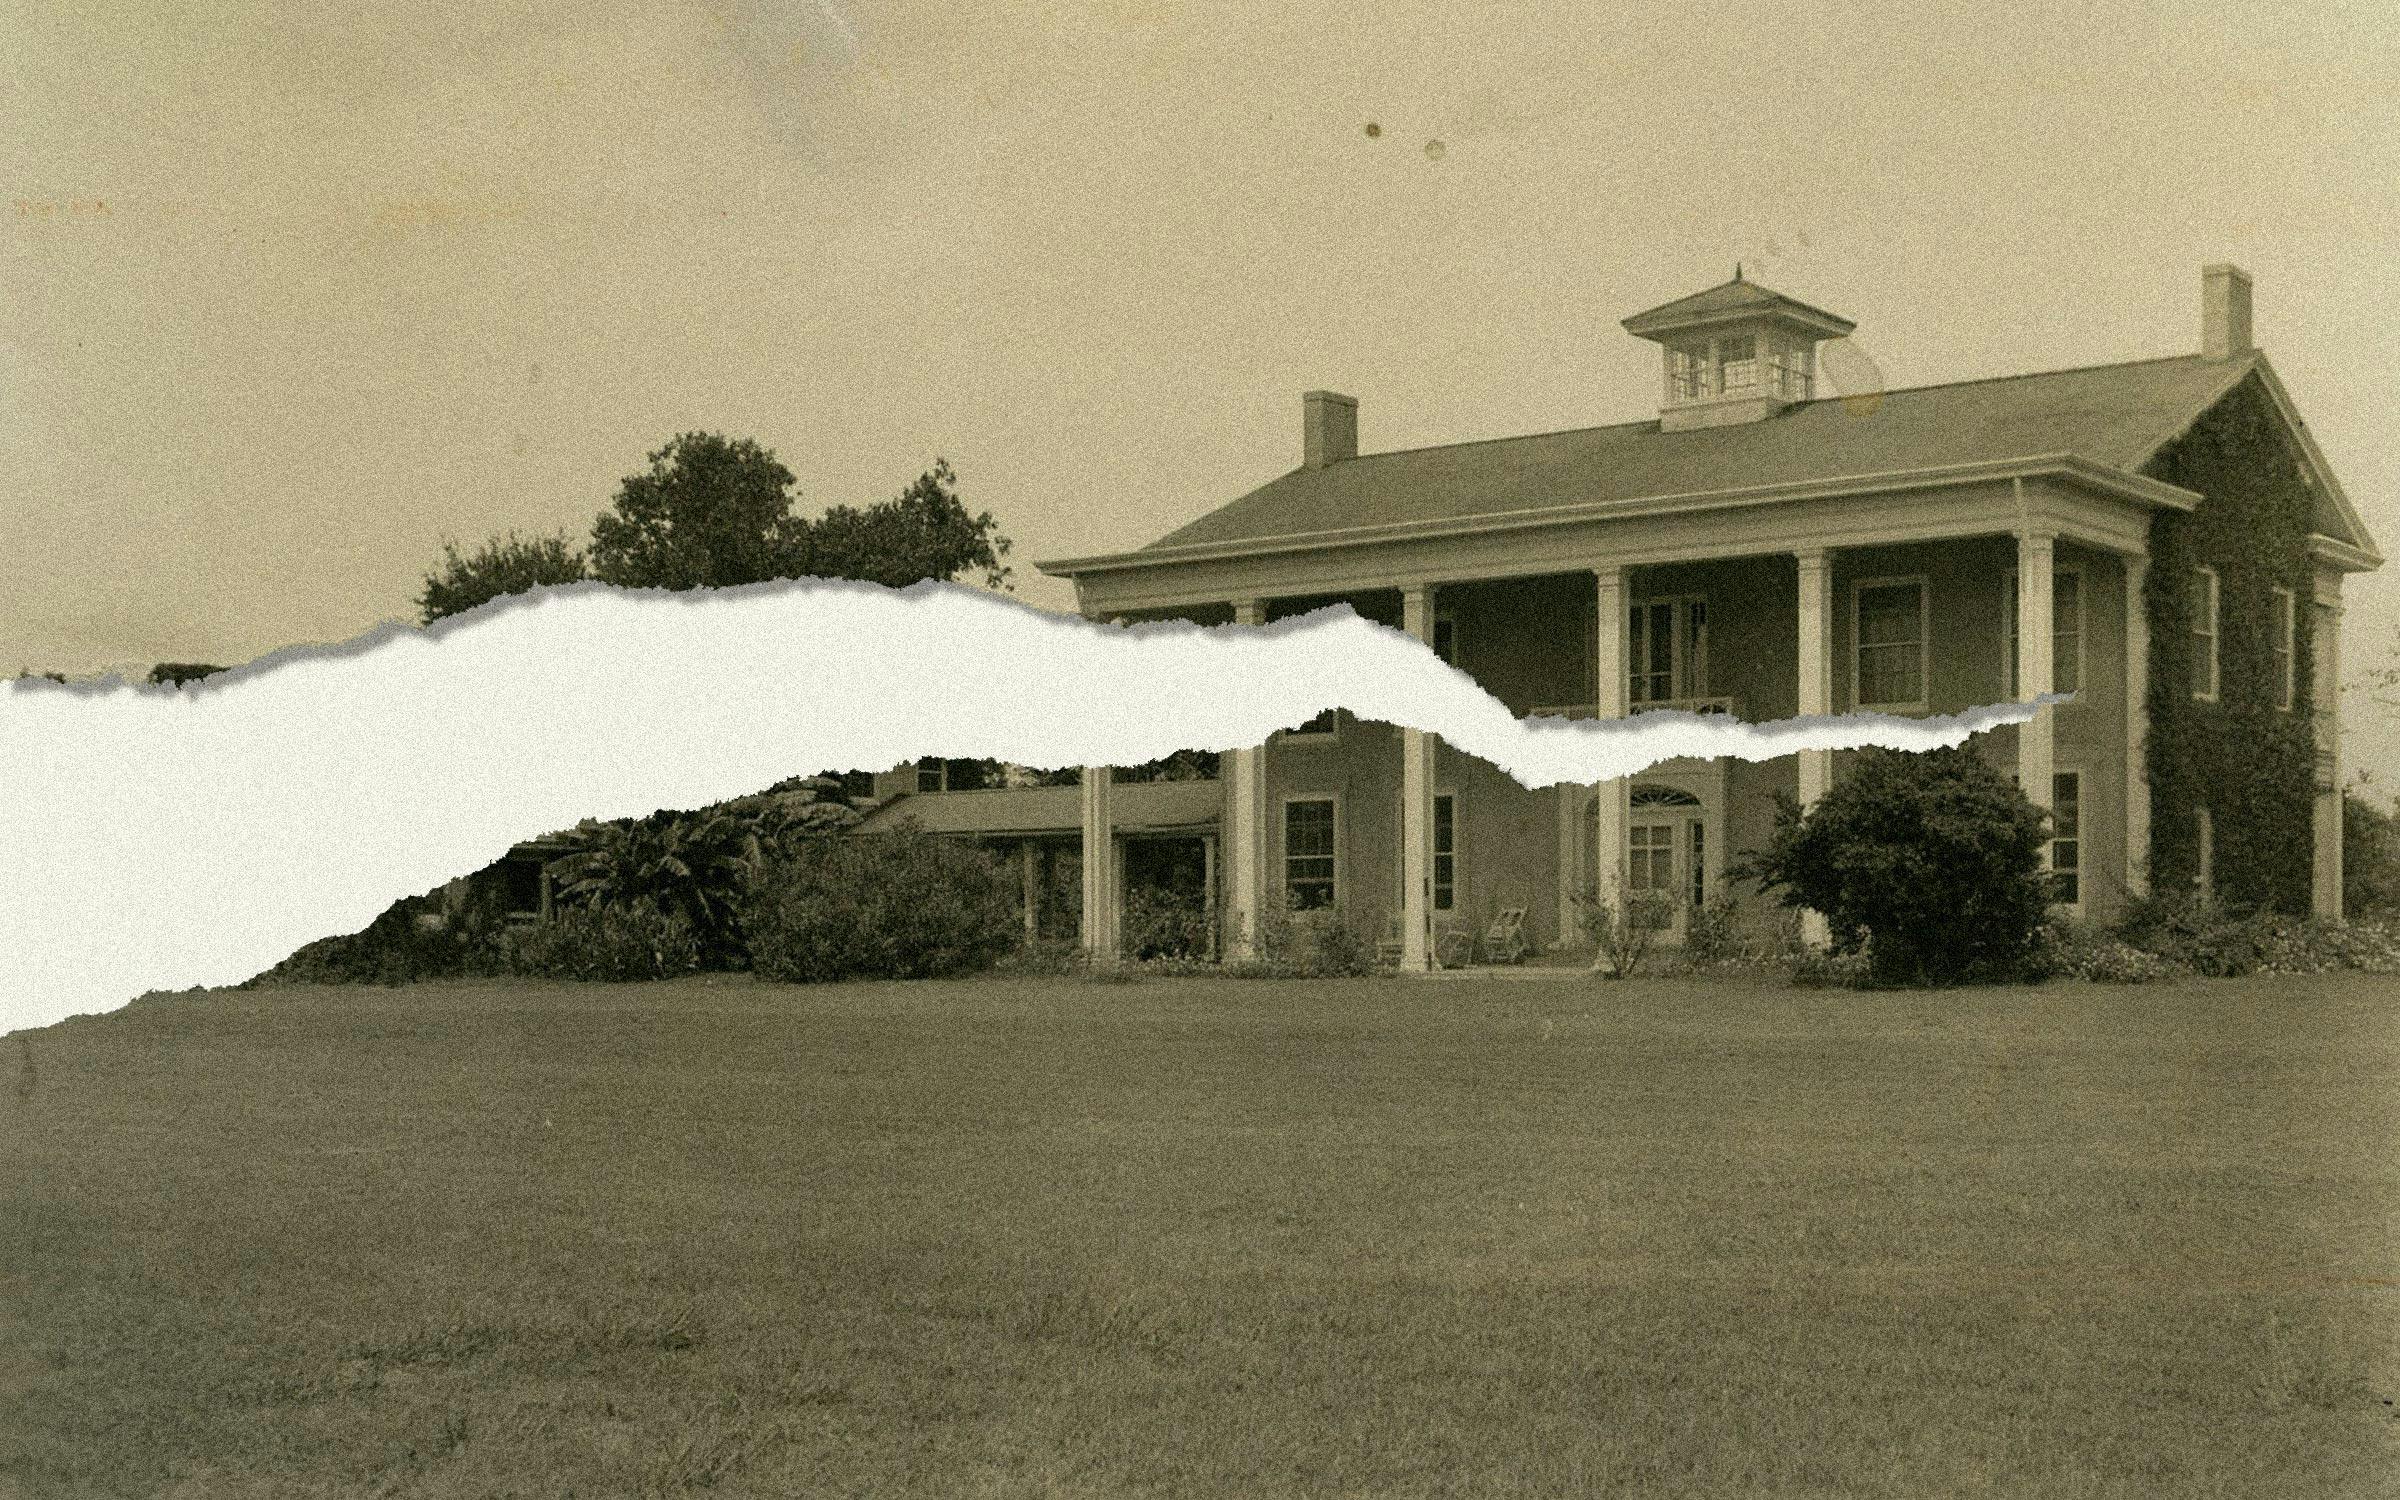 https://img.texasmonthly.com/2023/12/Texas-Historical-Commission-removing-books-Varner-Hogg-Plantation-Gift-Shop.jpg?auto=compress&crop=faces&fit=fit&fm=pjpg&ixlib=php-3.3.1&q=45